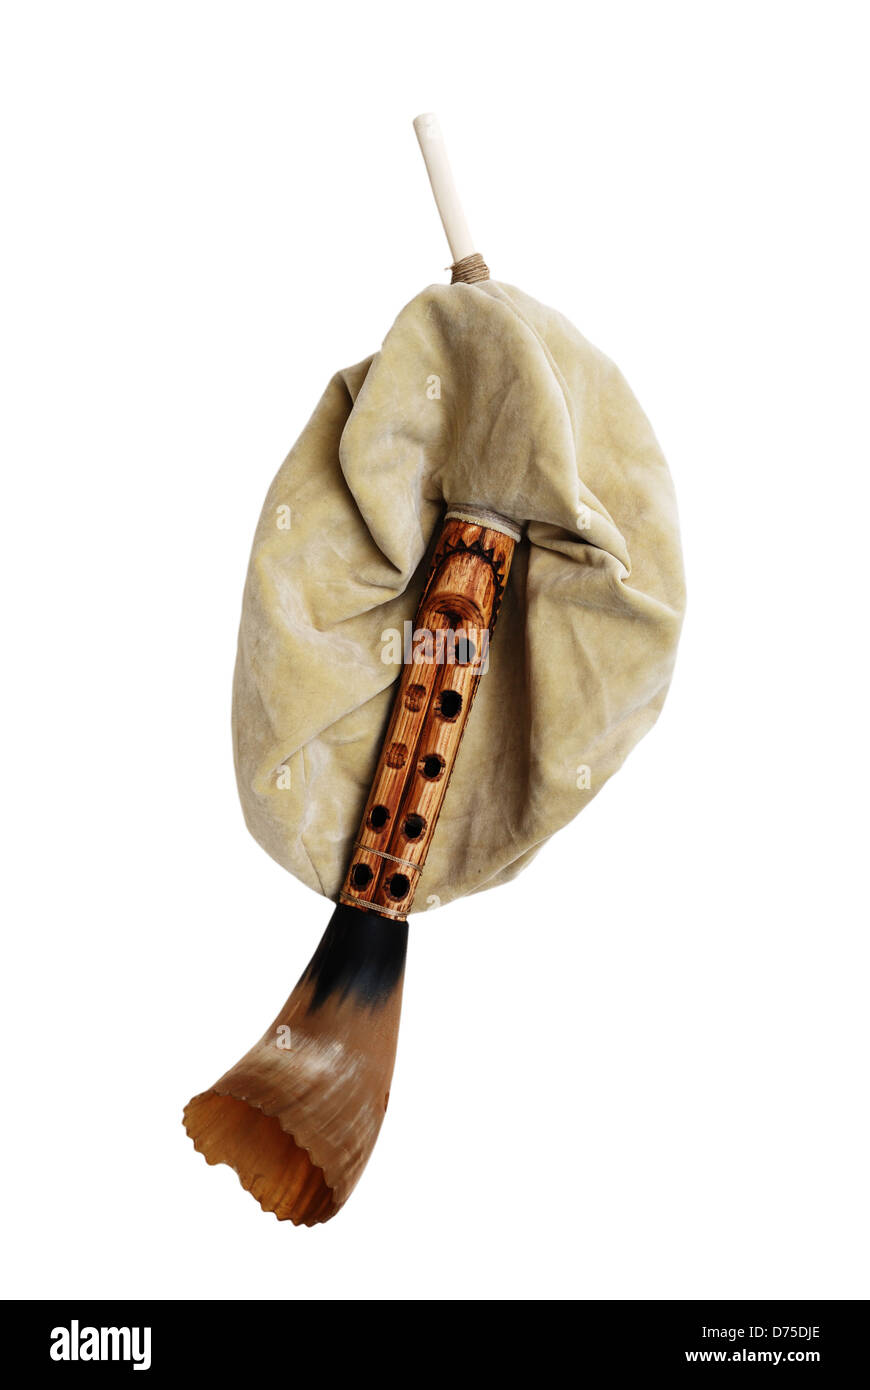 close-up of antique bagpipe from over white, horizontal Stock Photo